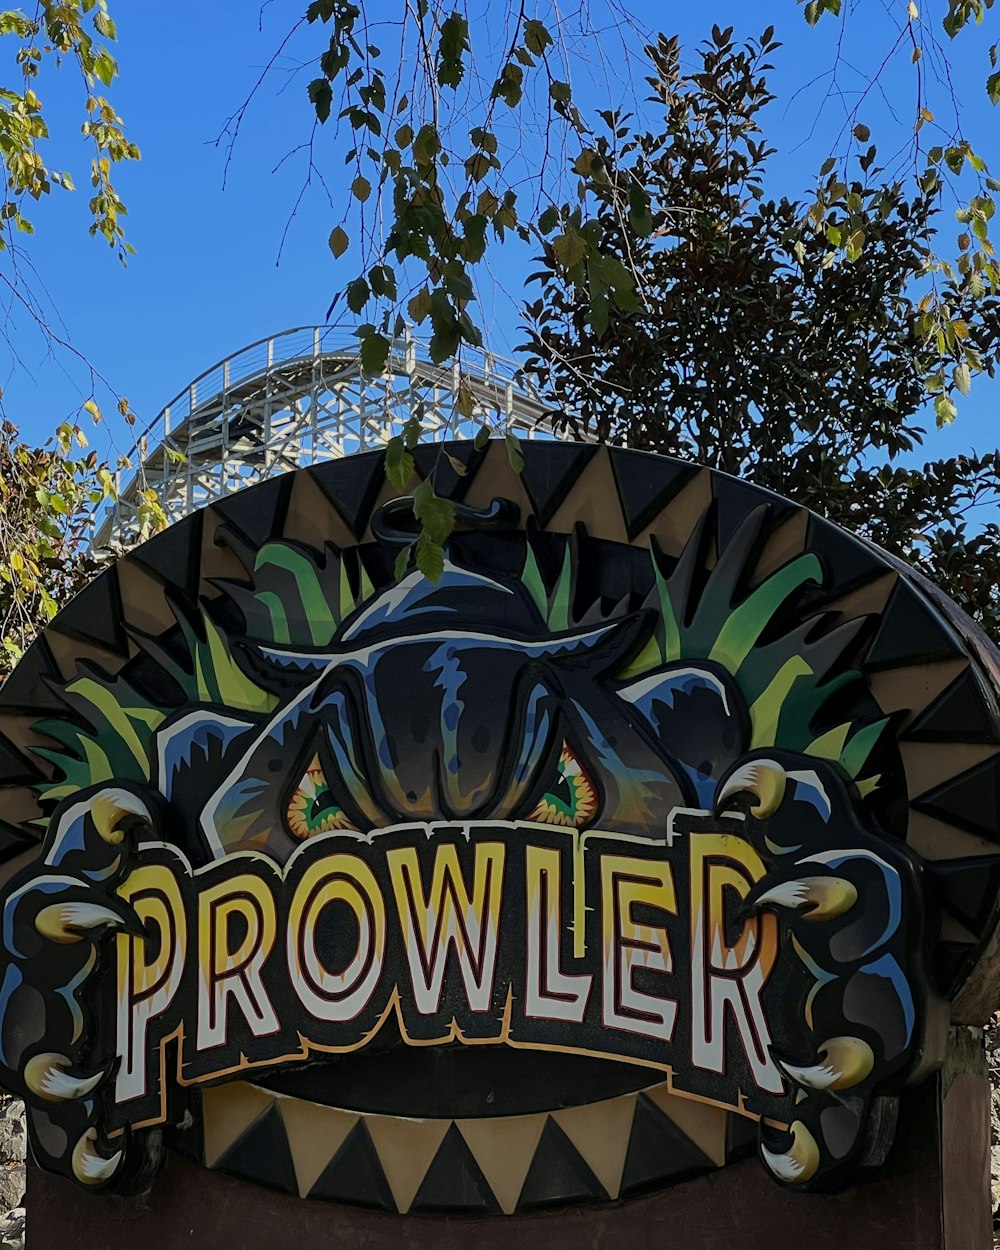 a sign that says prowller in front of some trees